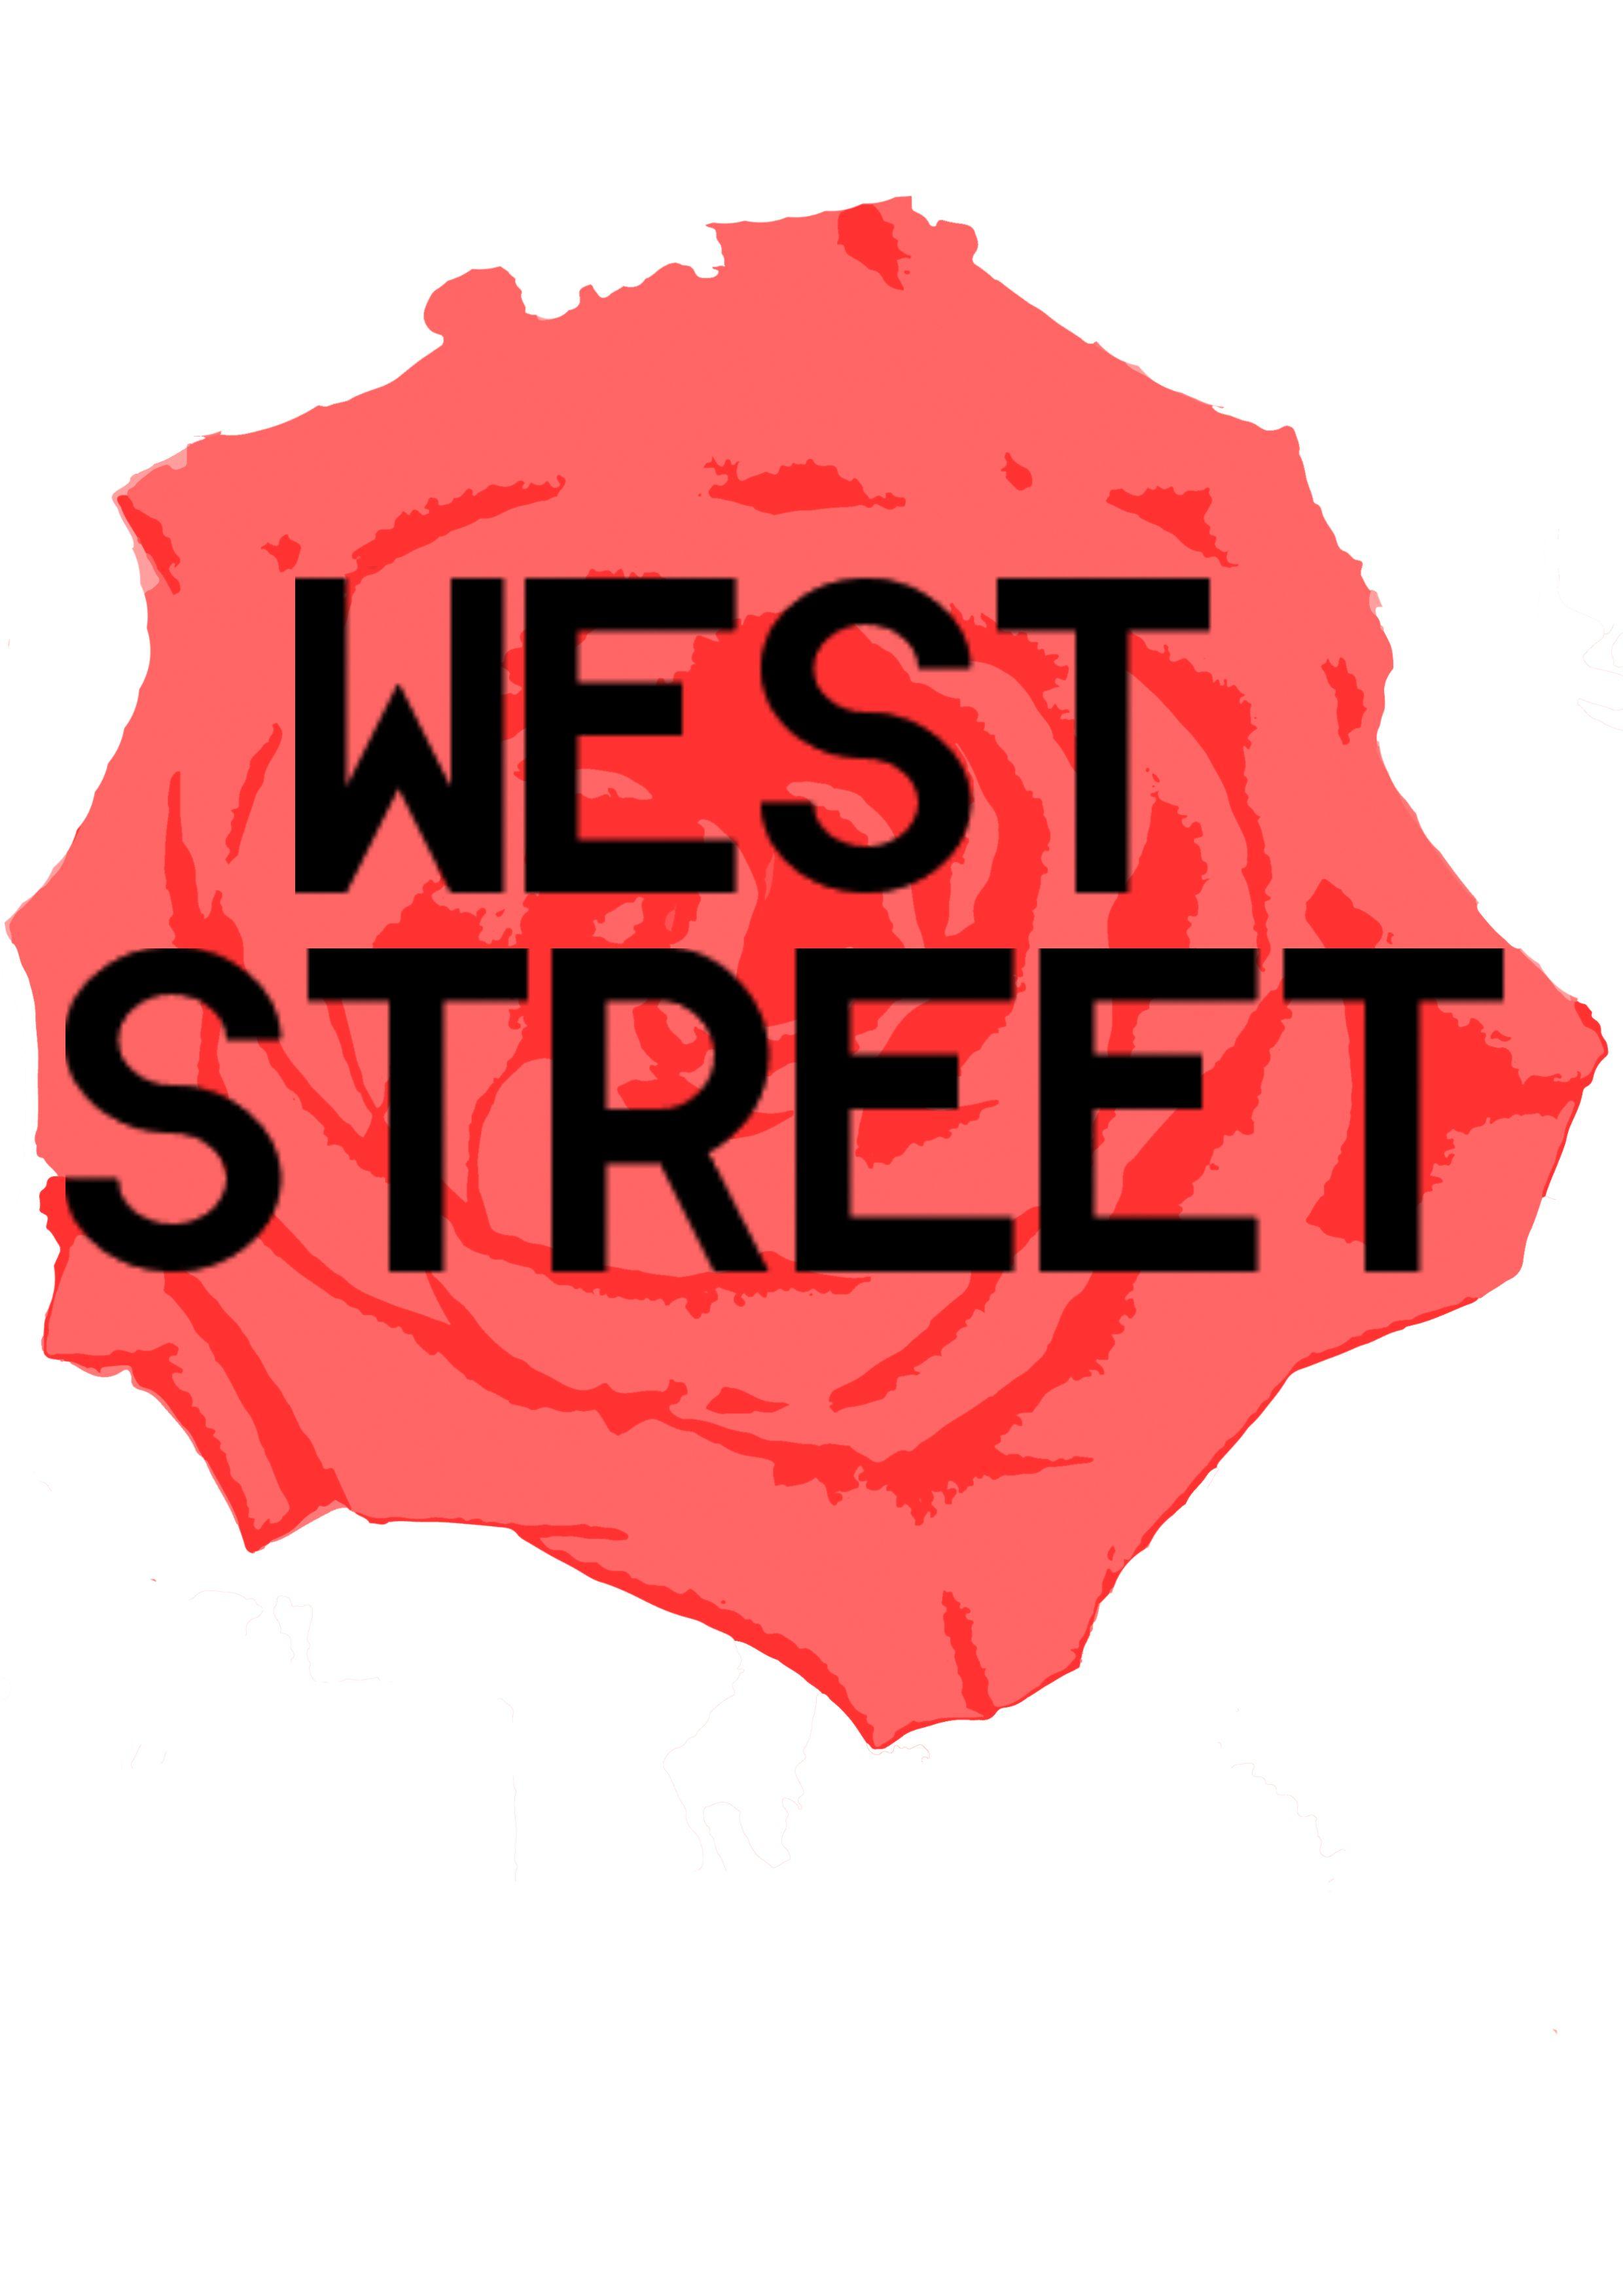 Red and Peach Logo - Personal clothing brand logo. West Street with red rose logo | New ...